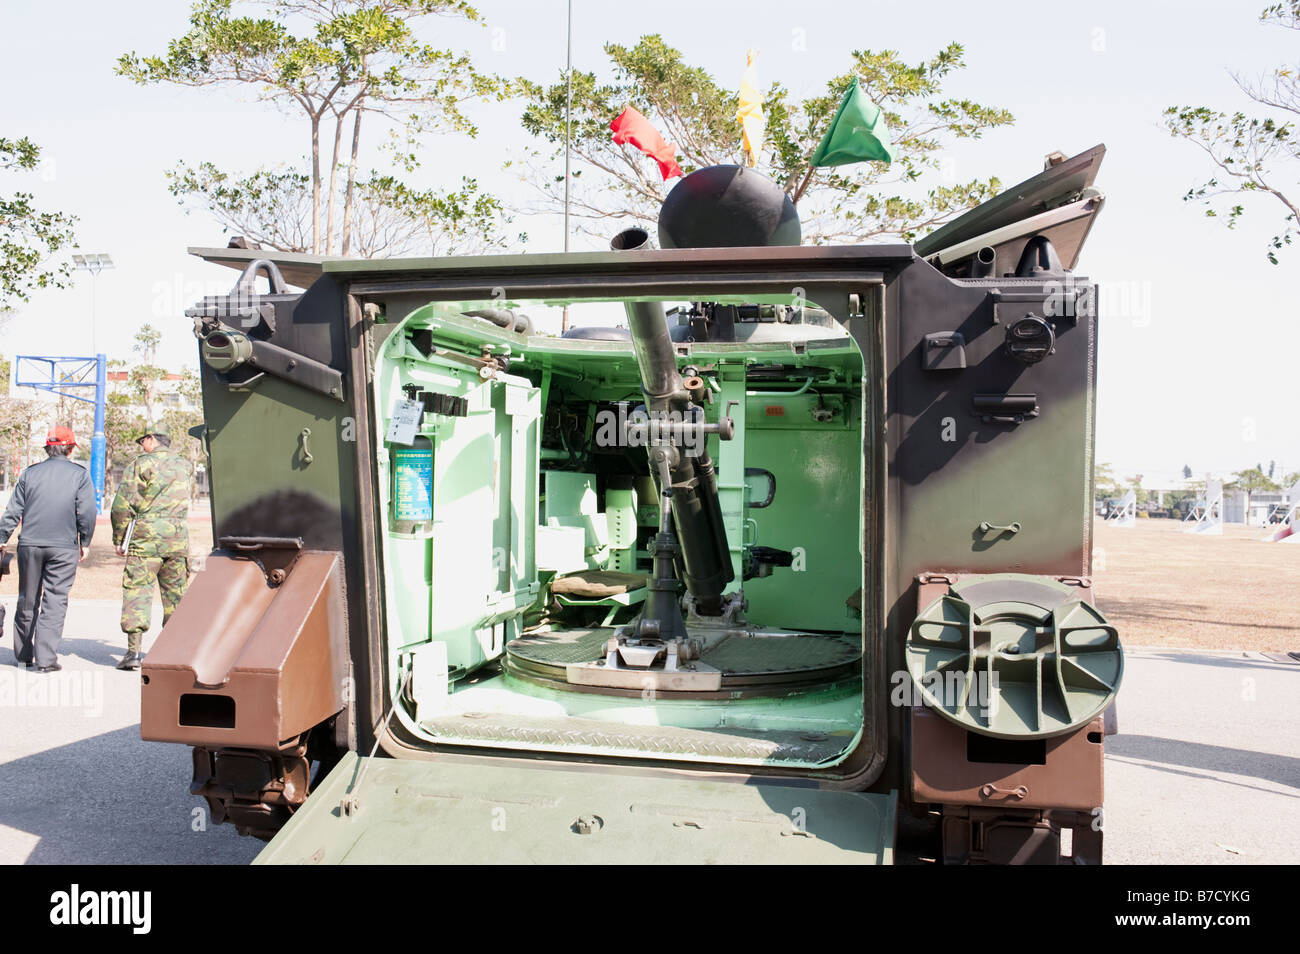 M30 107mm Mortar Inside CM21 APC Armored Personnel Carrier, 58th Artillery Command, Taichung, Taiwan Stock Photo